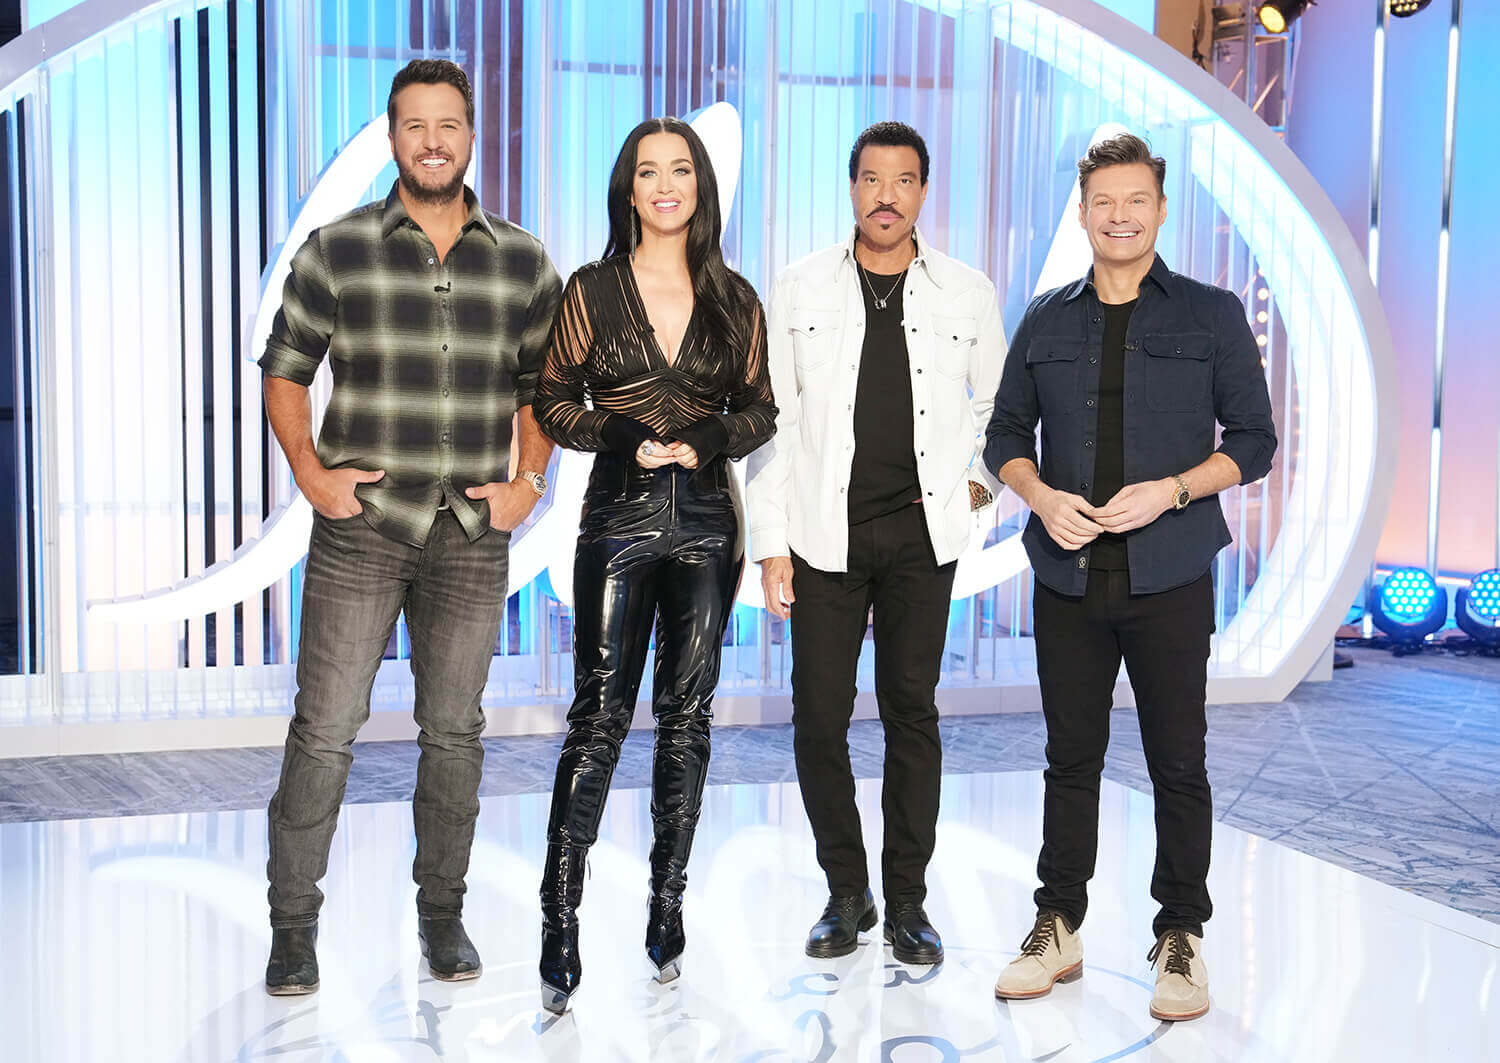 American Idol 2023 judges Luke Bryan, Katy Perry, Lionel Richie, and host Ryan Seacrest stand together in the audition room